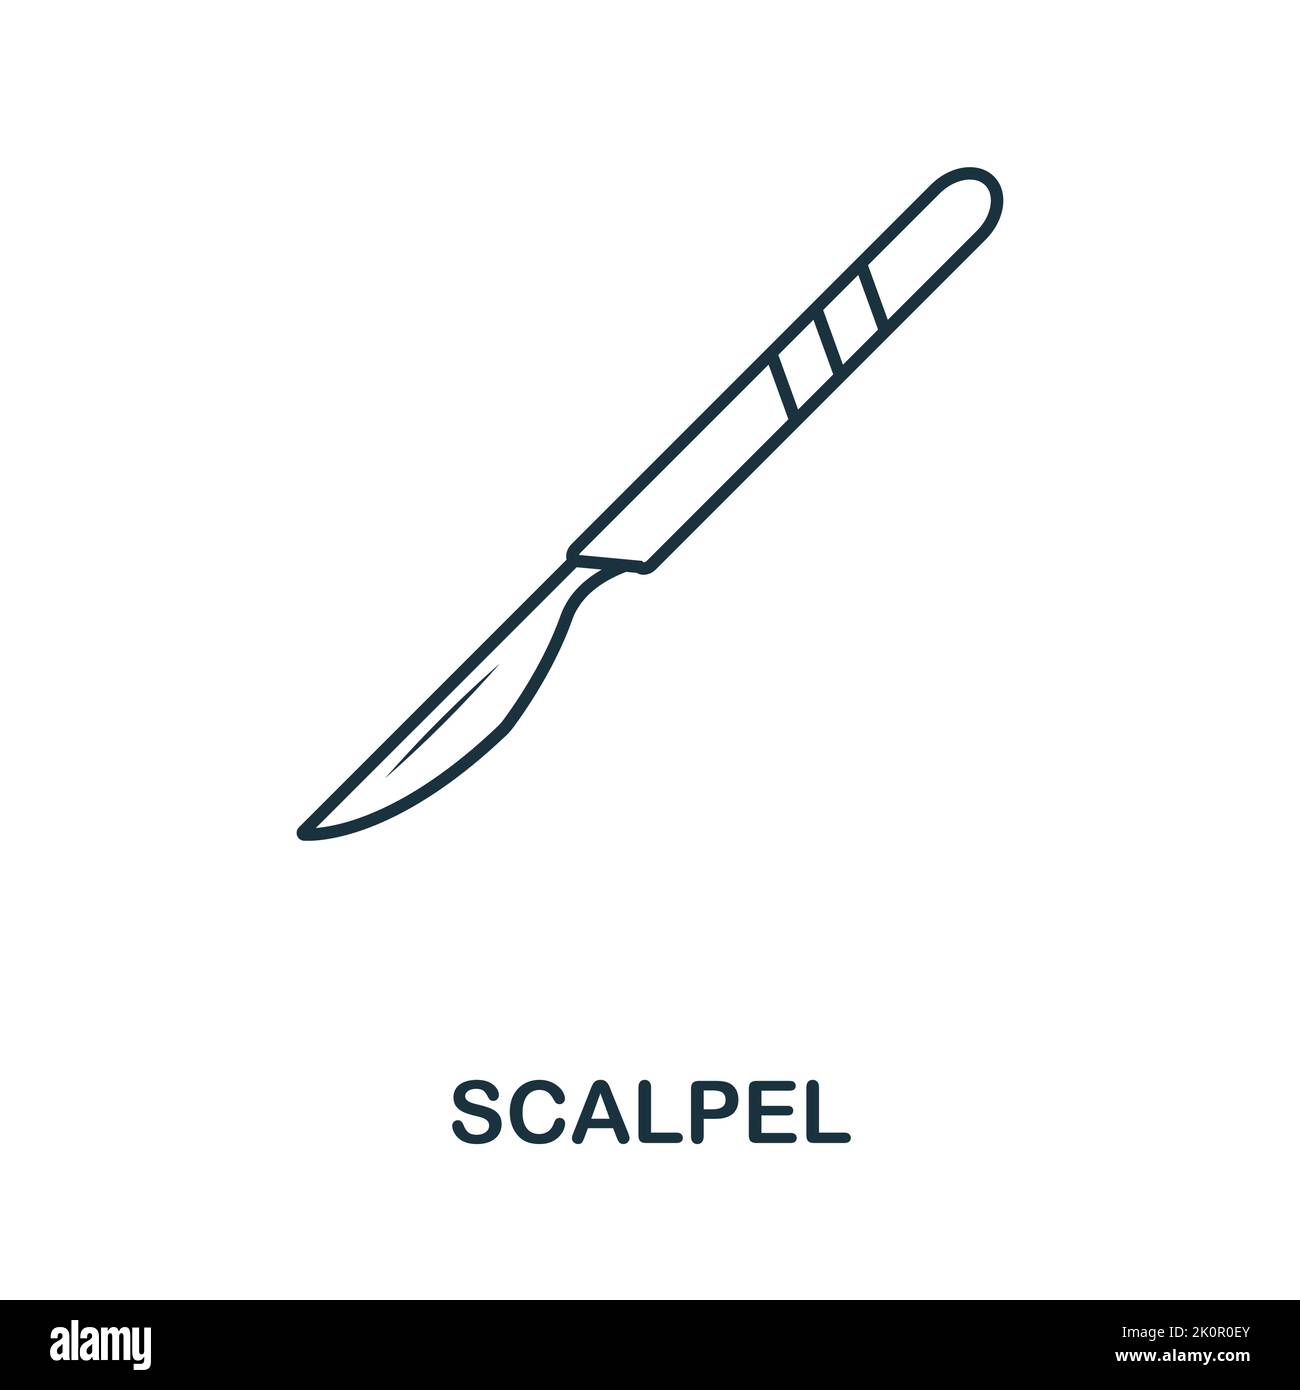 Scalpel icon. Monocrome element from medical services collection. Scalpel icon for banners, infographics and templates. Stock Vector